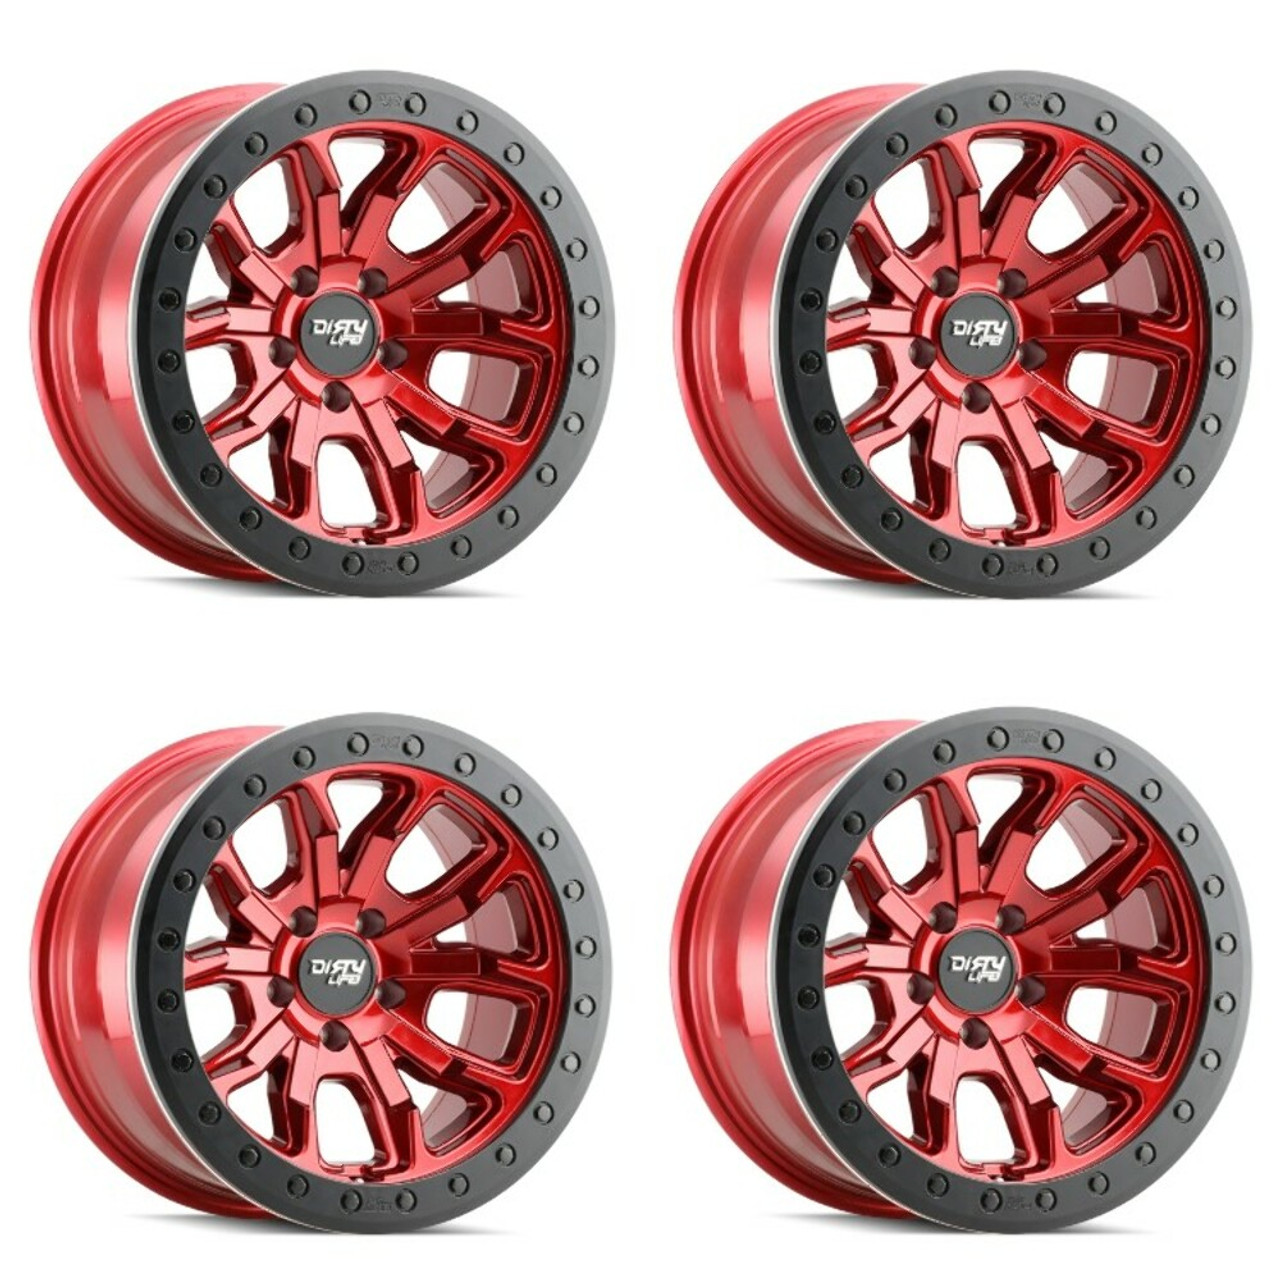 Set 4 17" Dirty Life DT-1 17x9 Crimson Candy Red 5x5 Wheels -12mm Lifted Rims